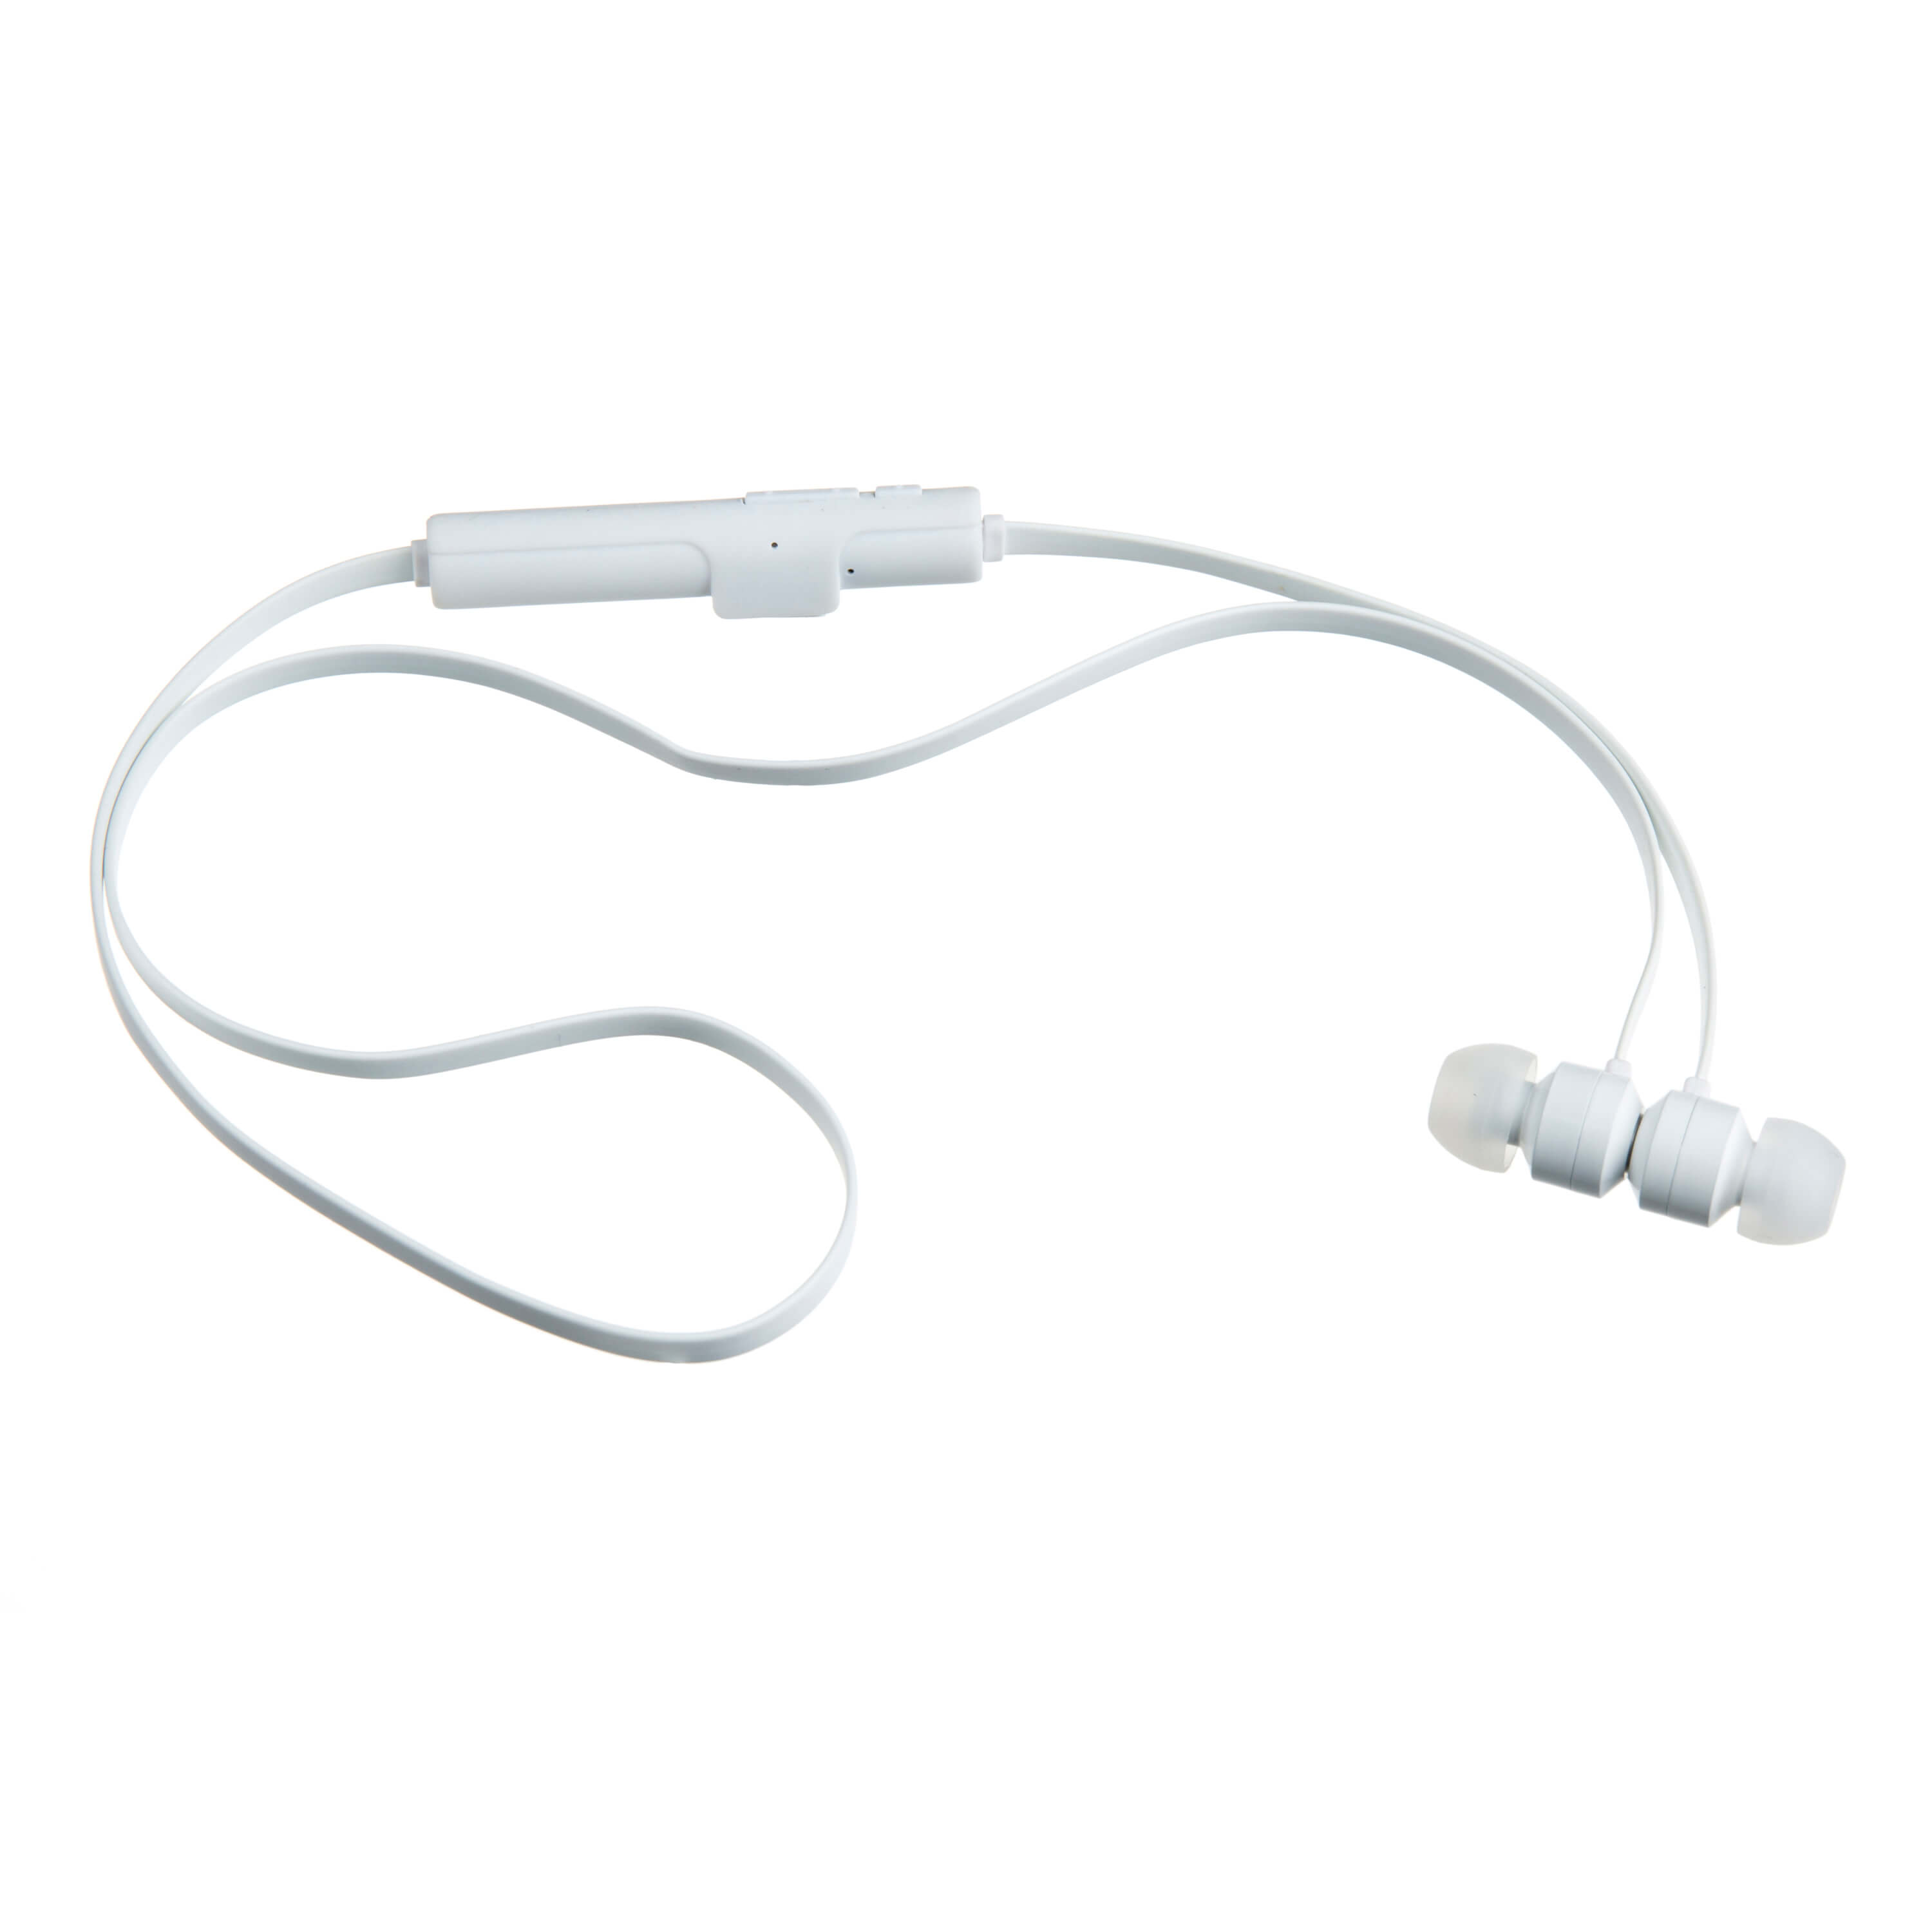 KITSOUND Earbud Ribbons White In-Ear Wireless Mic